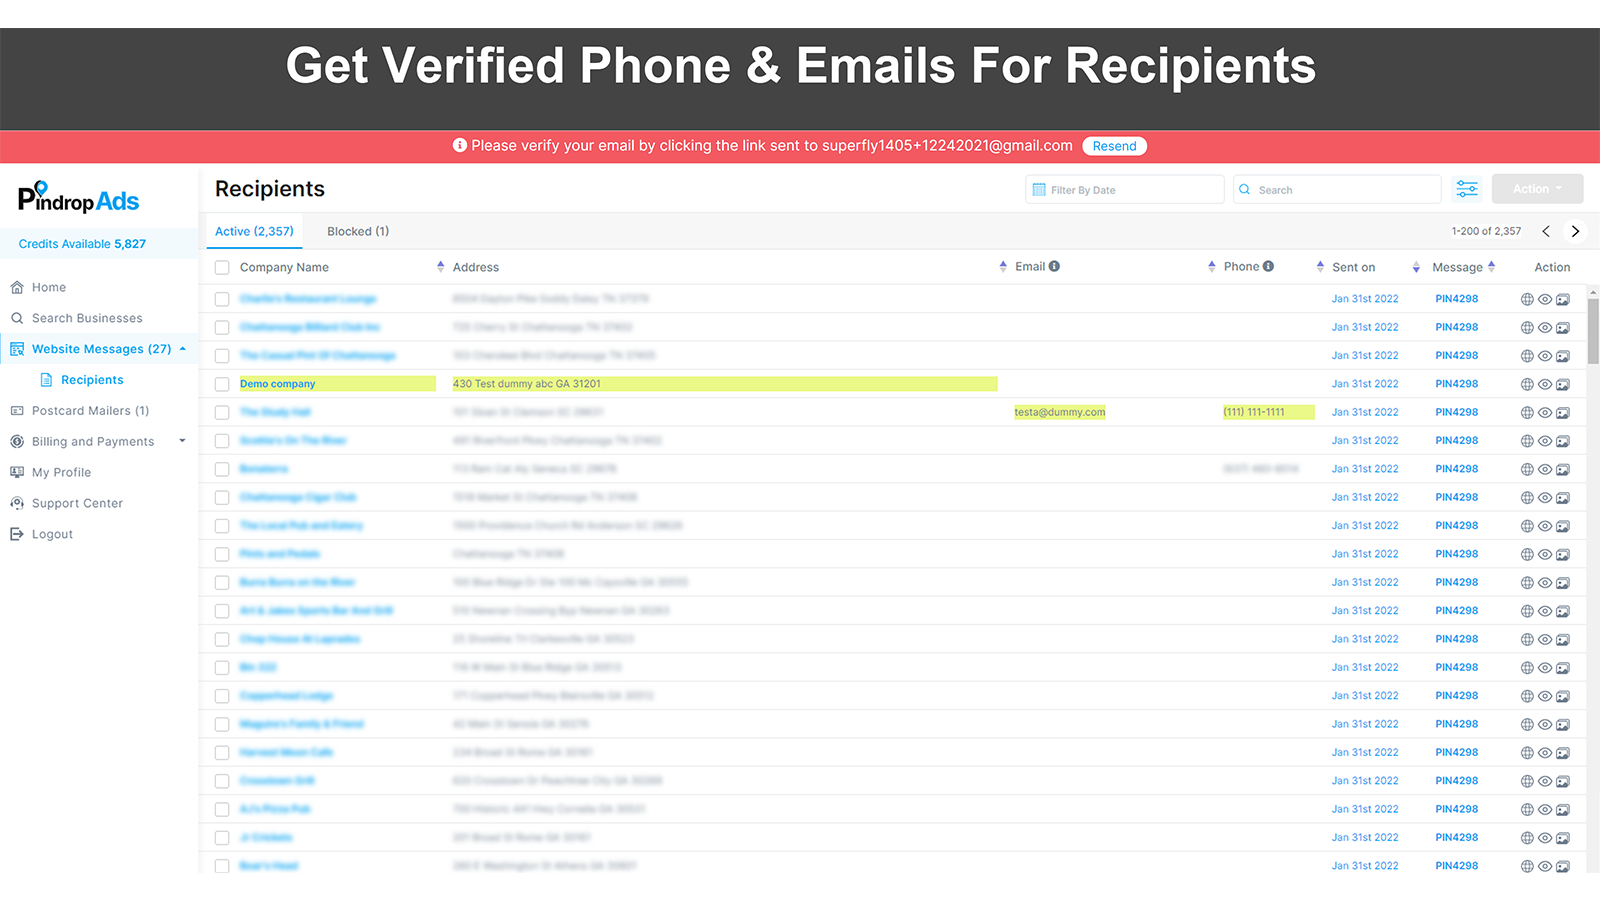 See verified phone and emails of recipients